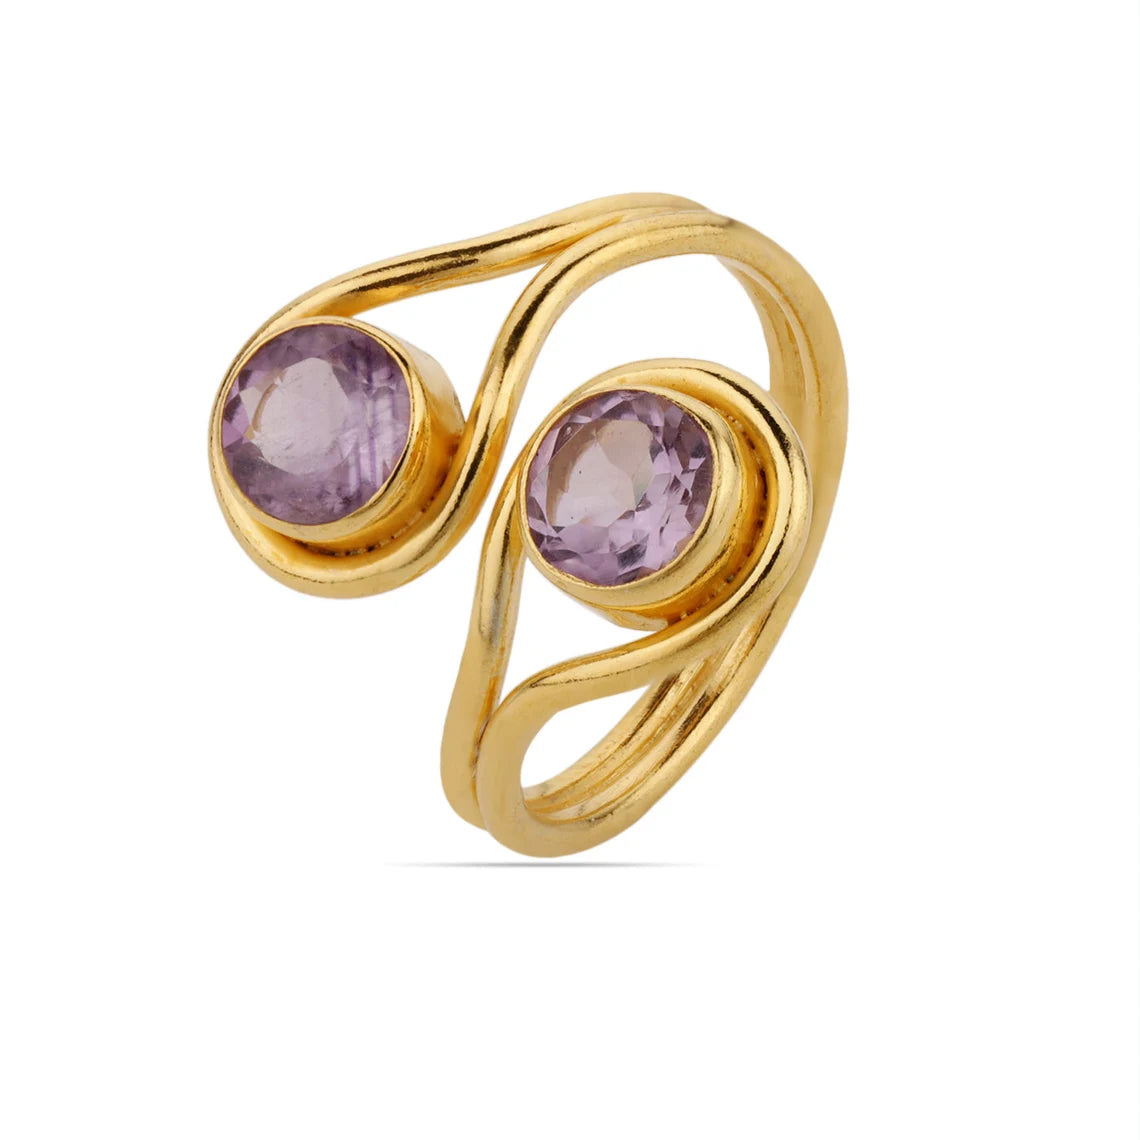 Gold Amethyst Ring - Adjustable Band Ring - Round Amethyst Two Gems Ring - Handmade Ring